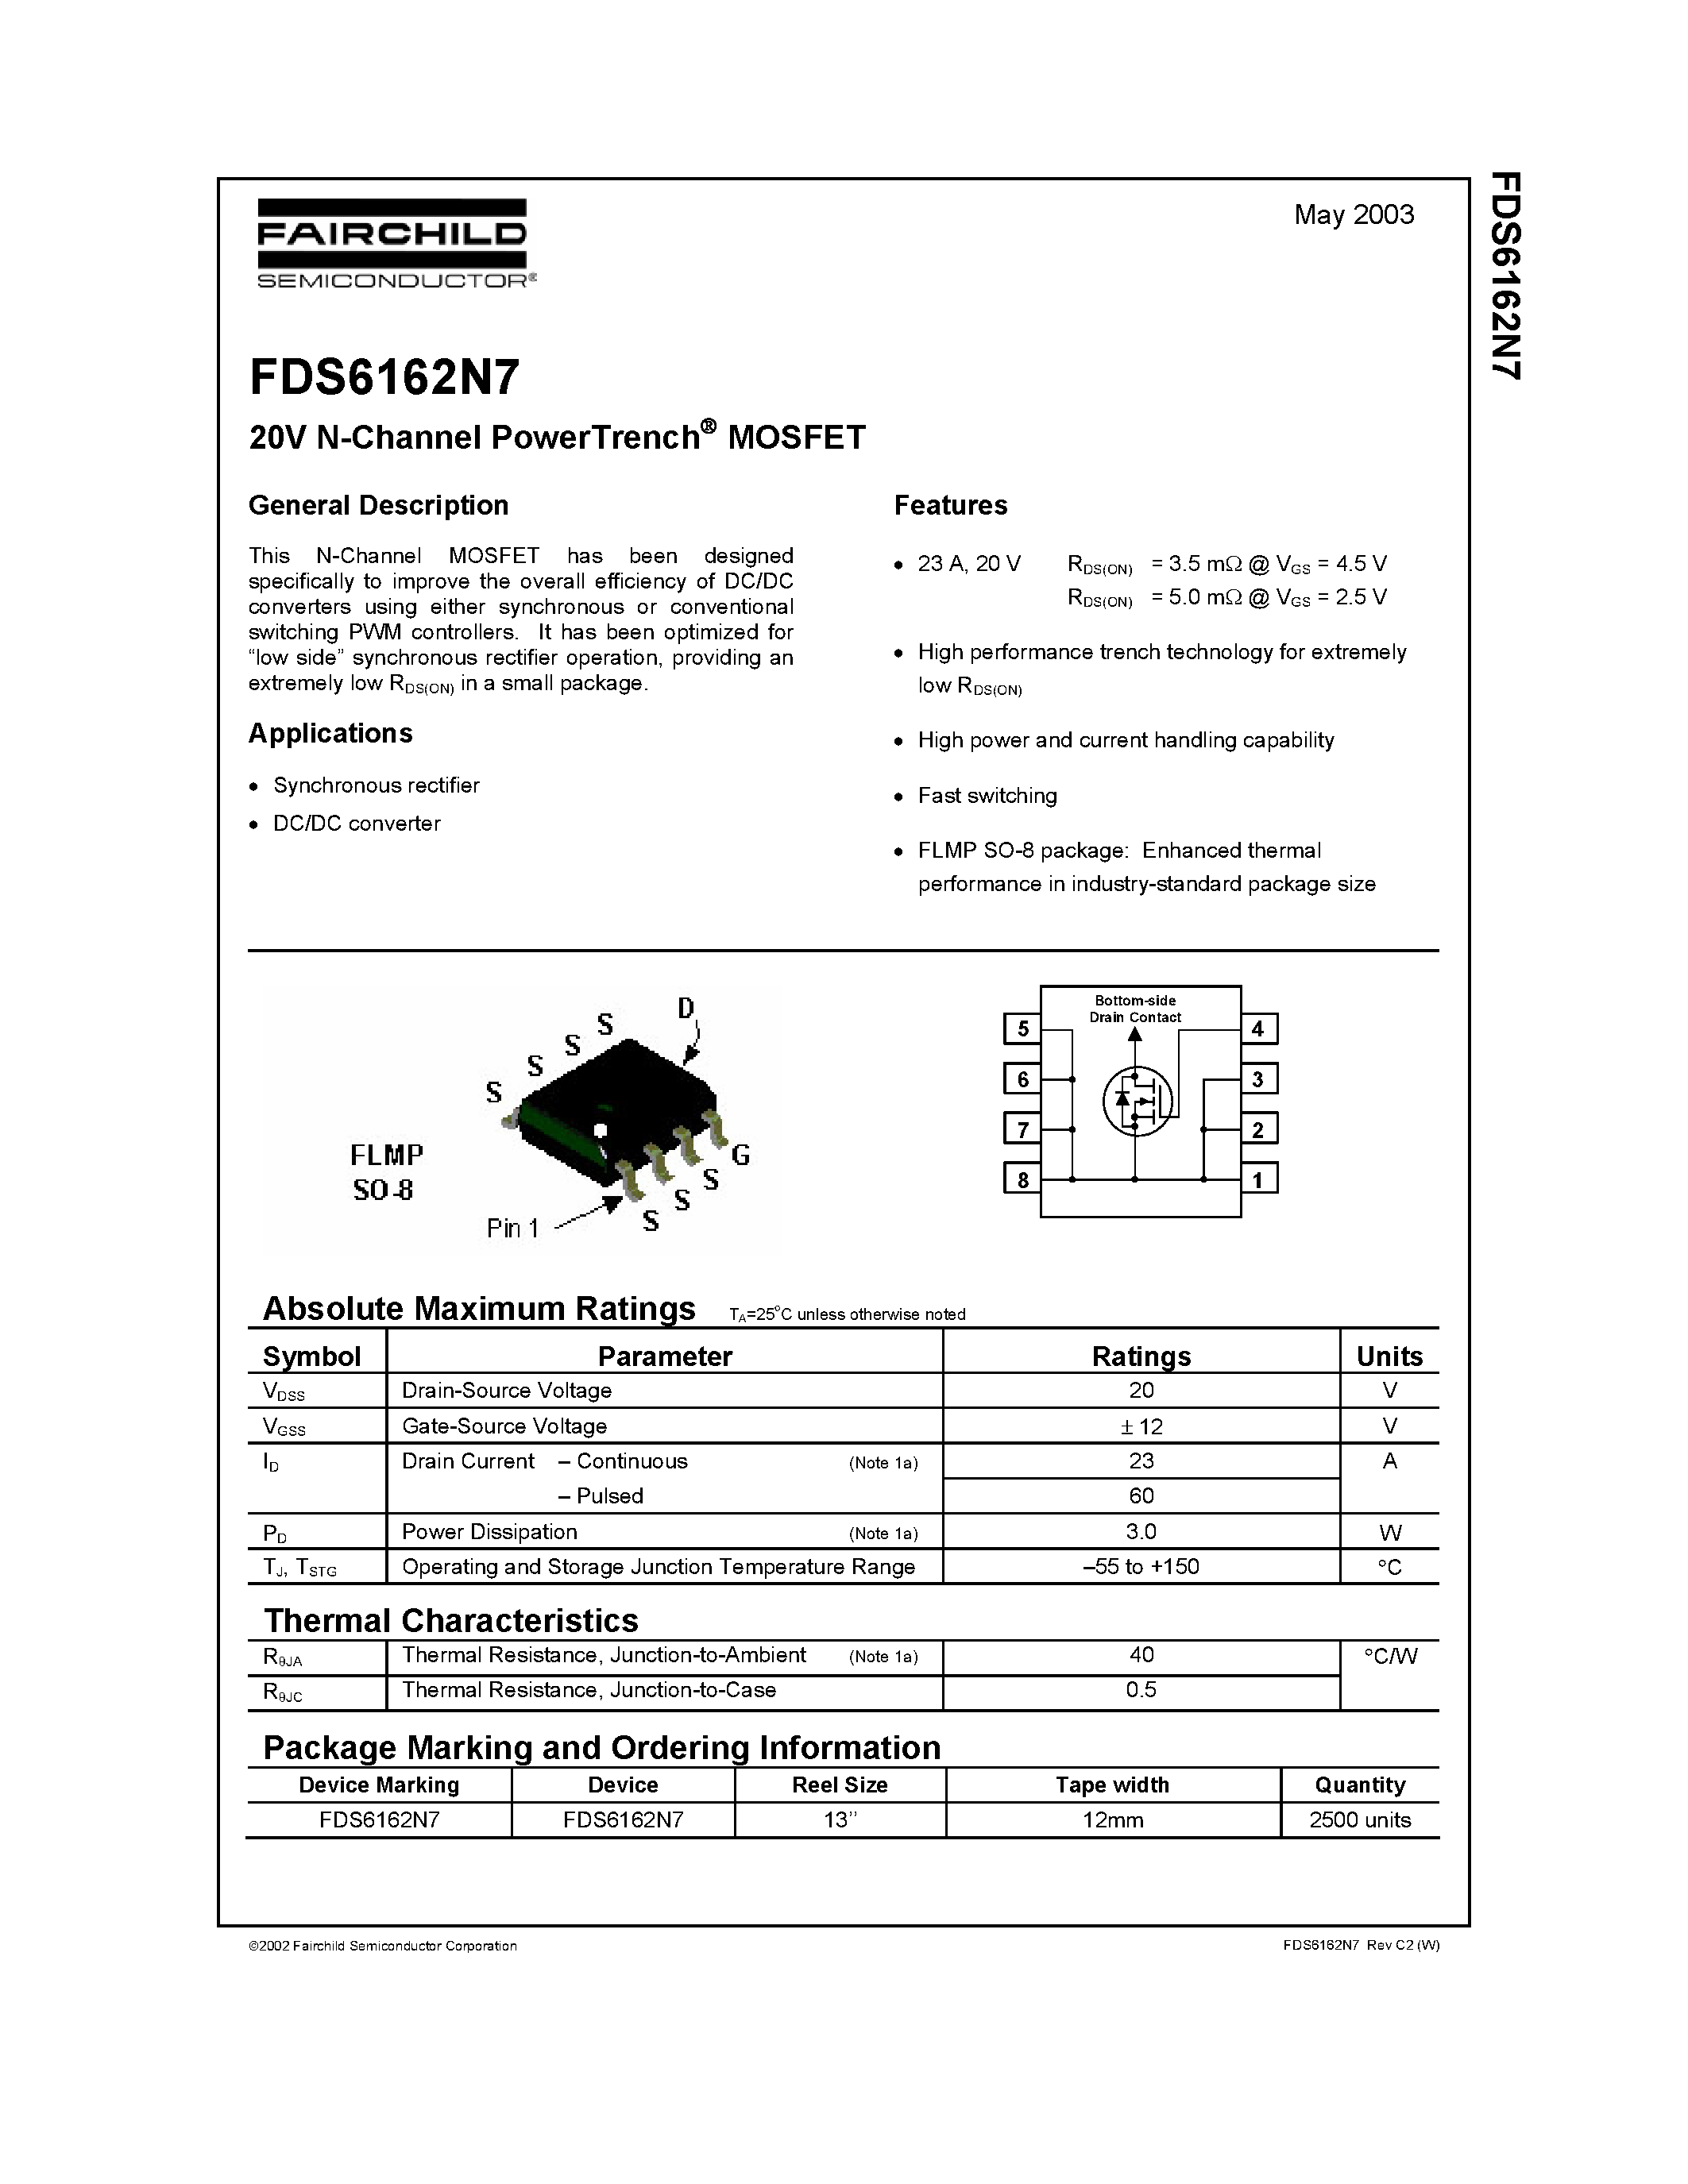 Datasheet FDS6162N7 - 20V N-Channel PowerTrench MOSFET page 1